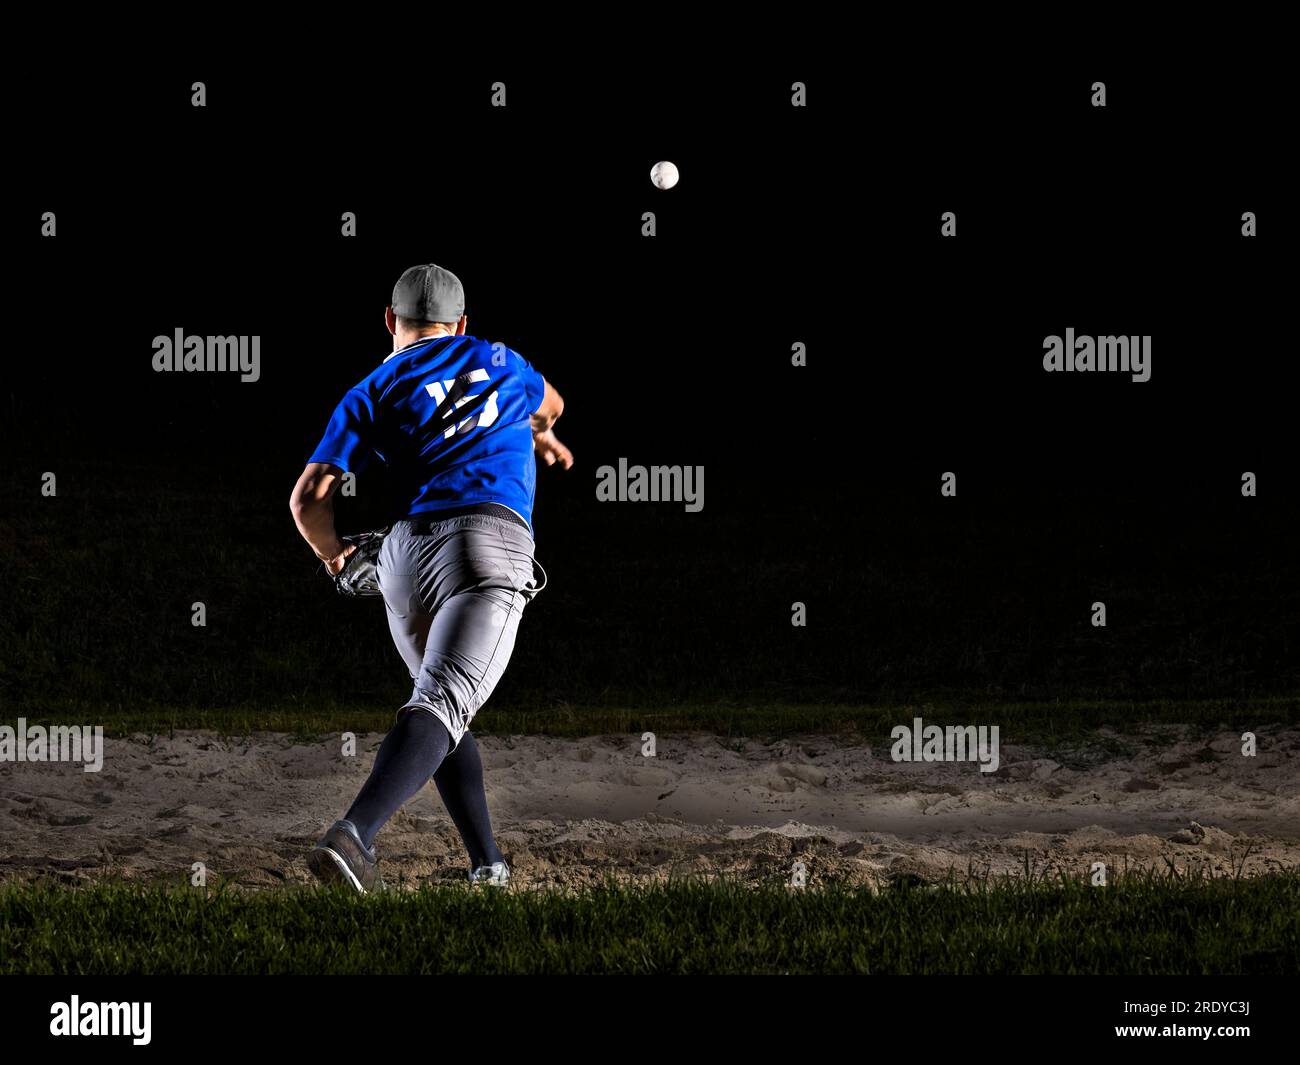 Young man with sports clothing throwing baseball at night Stock Photo